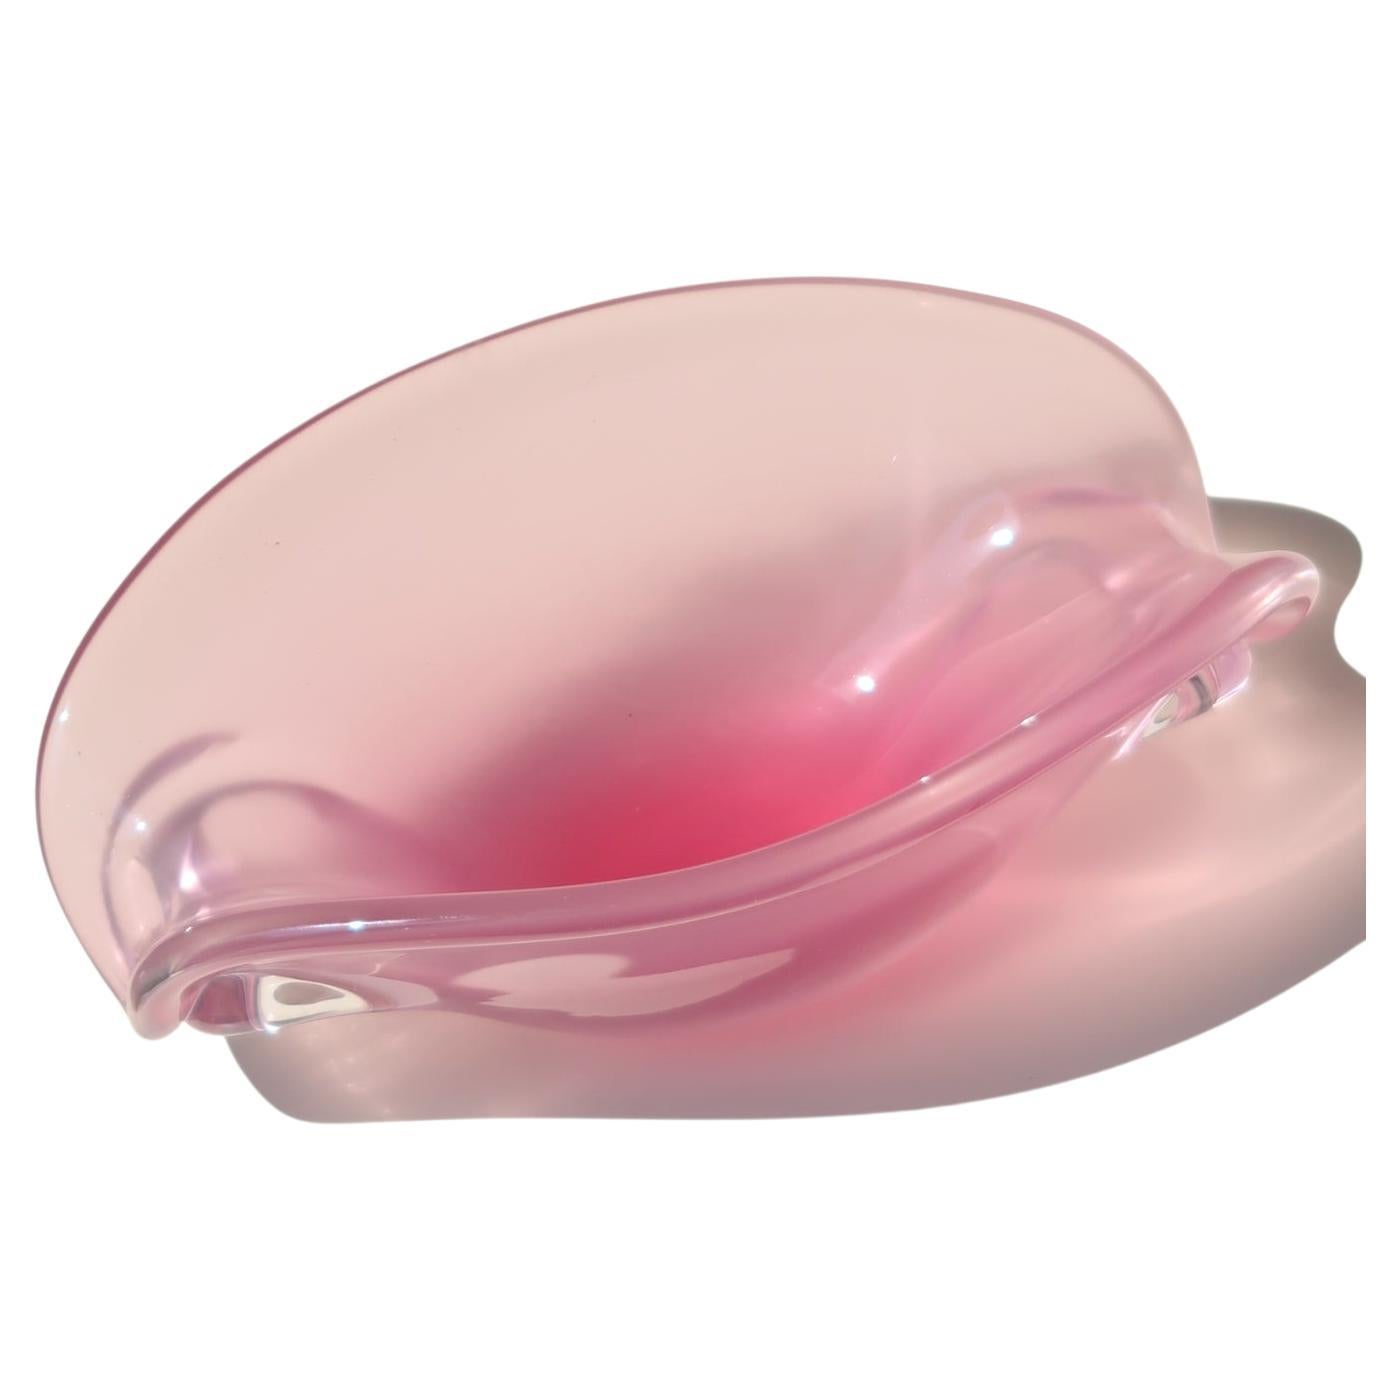 Vintage Murano 1970s Mouth Blown Shell Clam Bowl in Pink Alabastro Glass For Sale